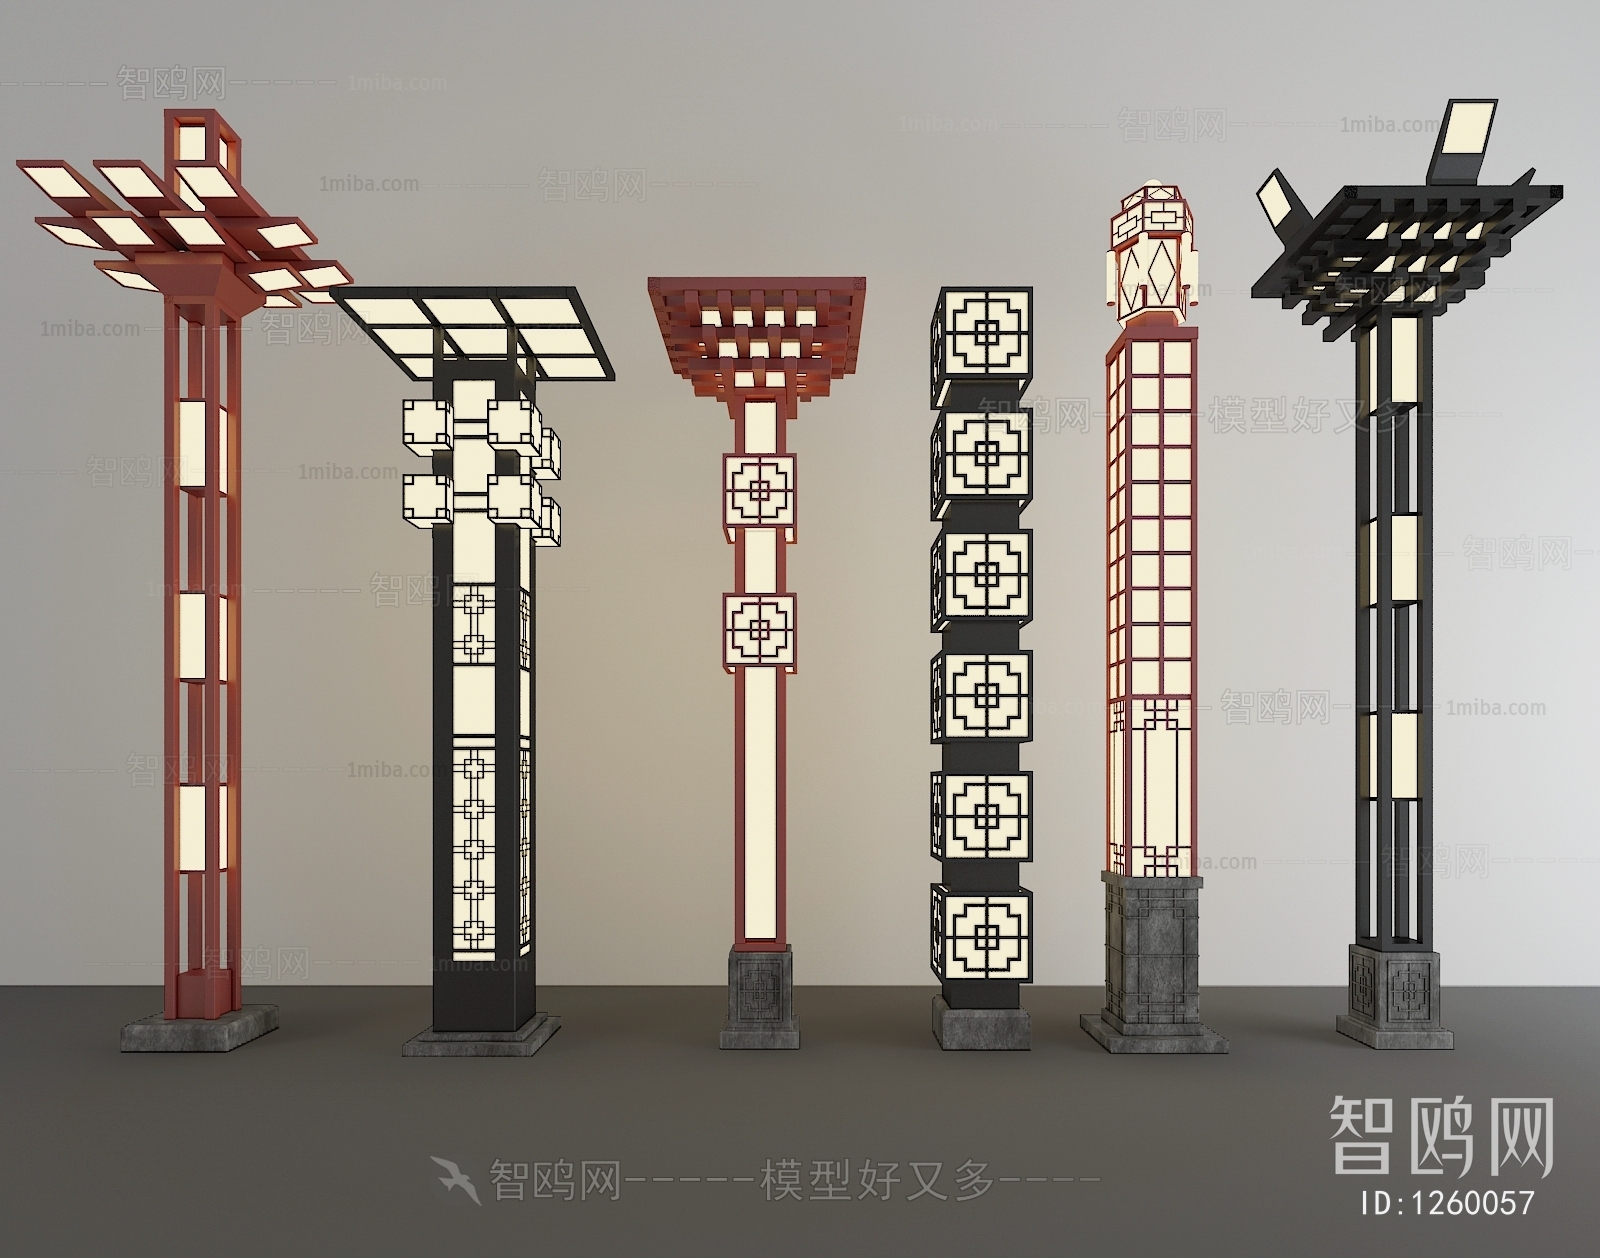 Chinese Style Outdoor Light